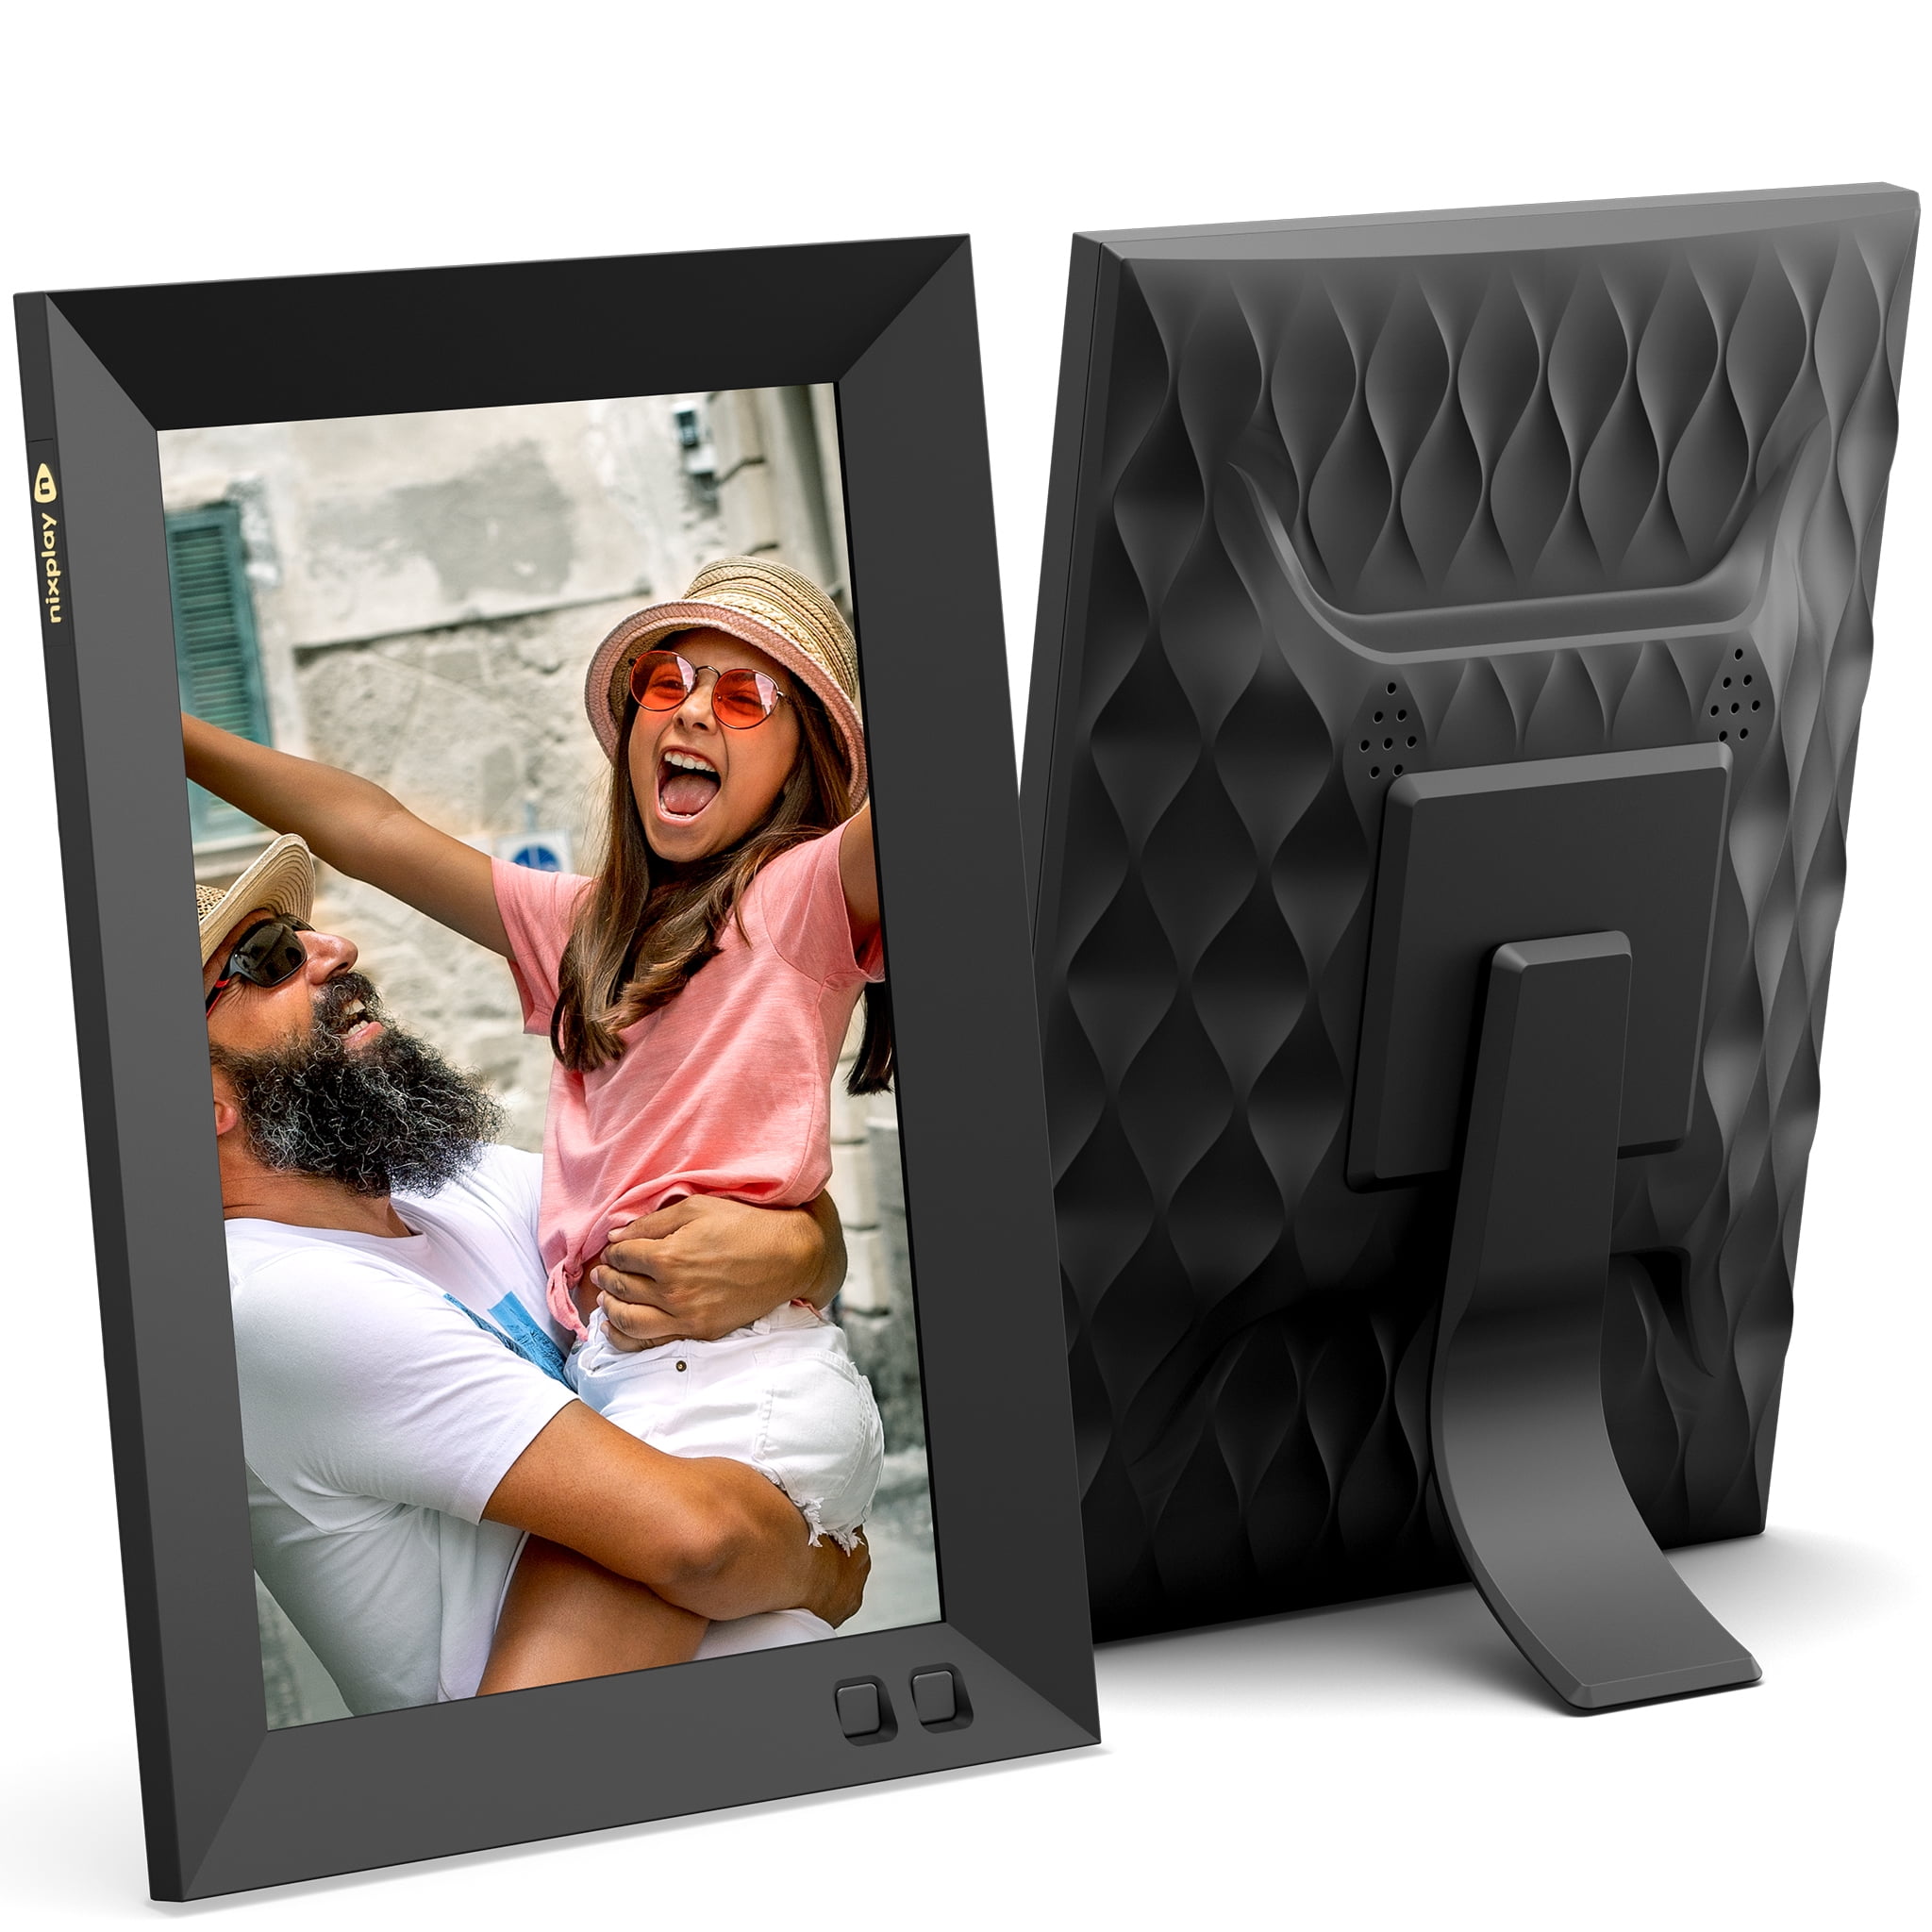 Nixplay inch Smart Digital Photo Frame with WiFi (W08G) Black Share  Photos and Videos Instantly via Email or App